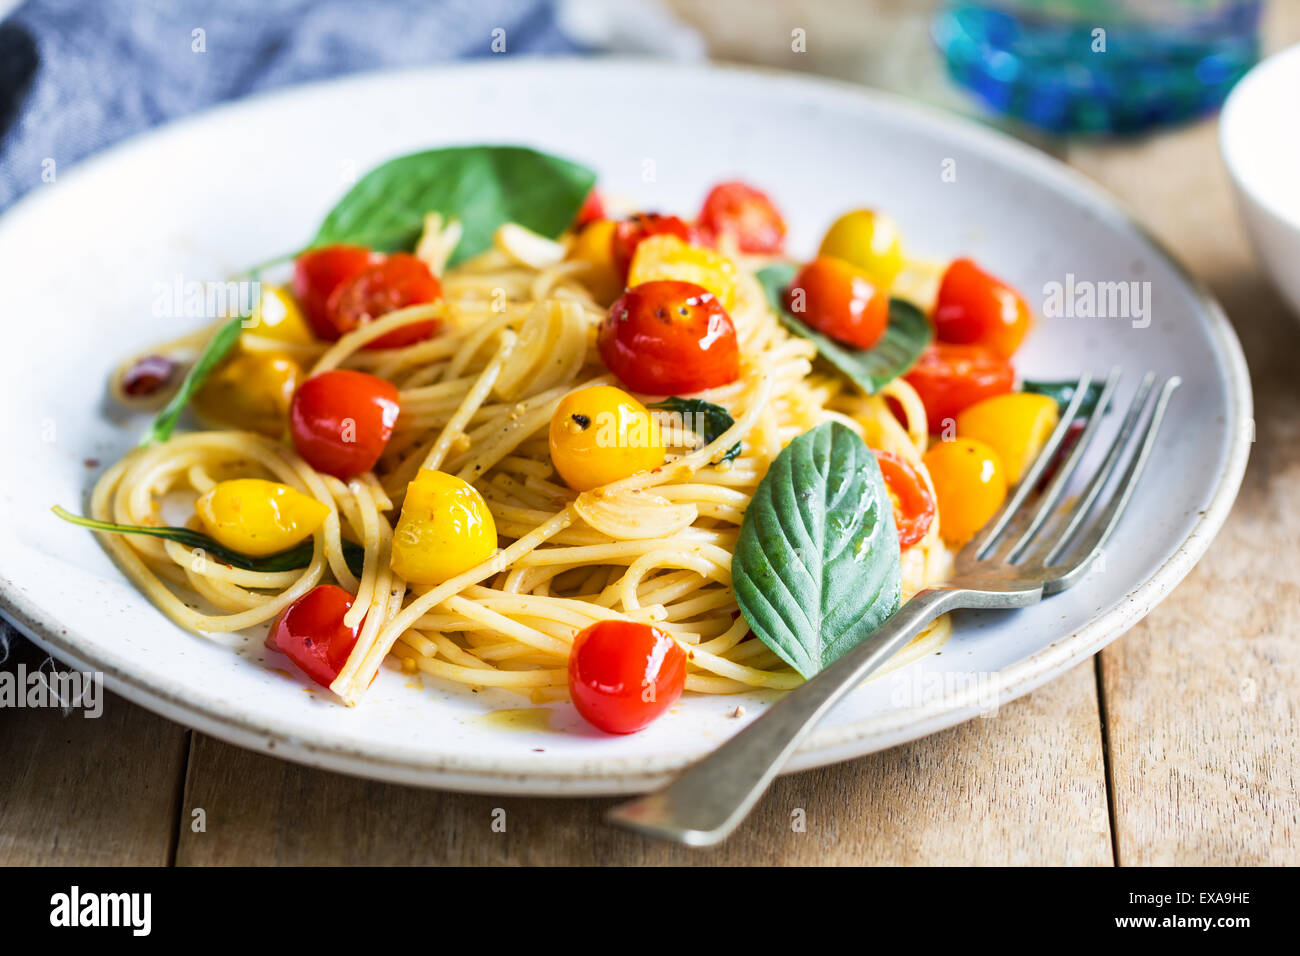 Spaghetti with red and yellow cherry tomato by sea salt Stock Photo